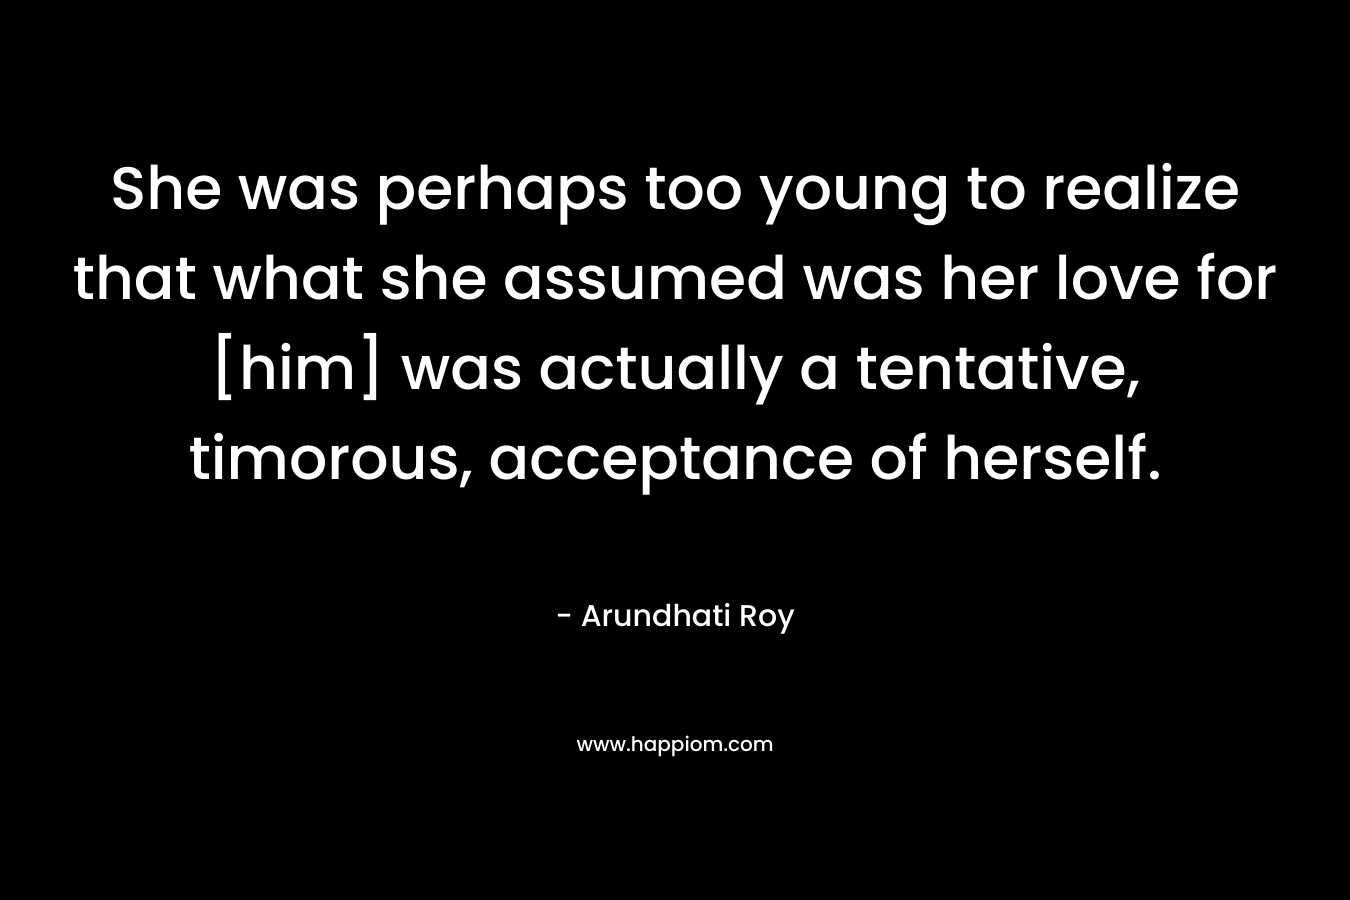 She was perhaps too young to realize that what she assumed was her love for [him] was actually a tentative, timorous, acceptance of herself.